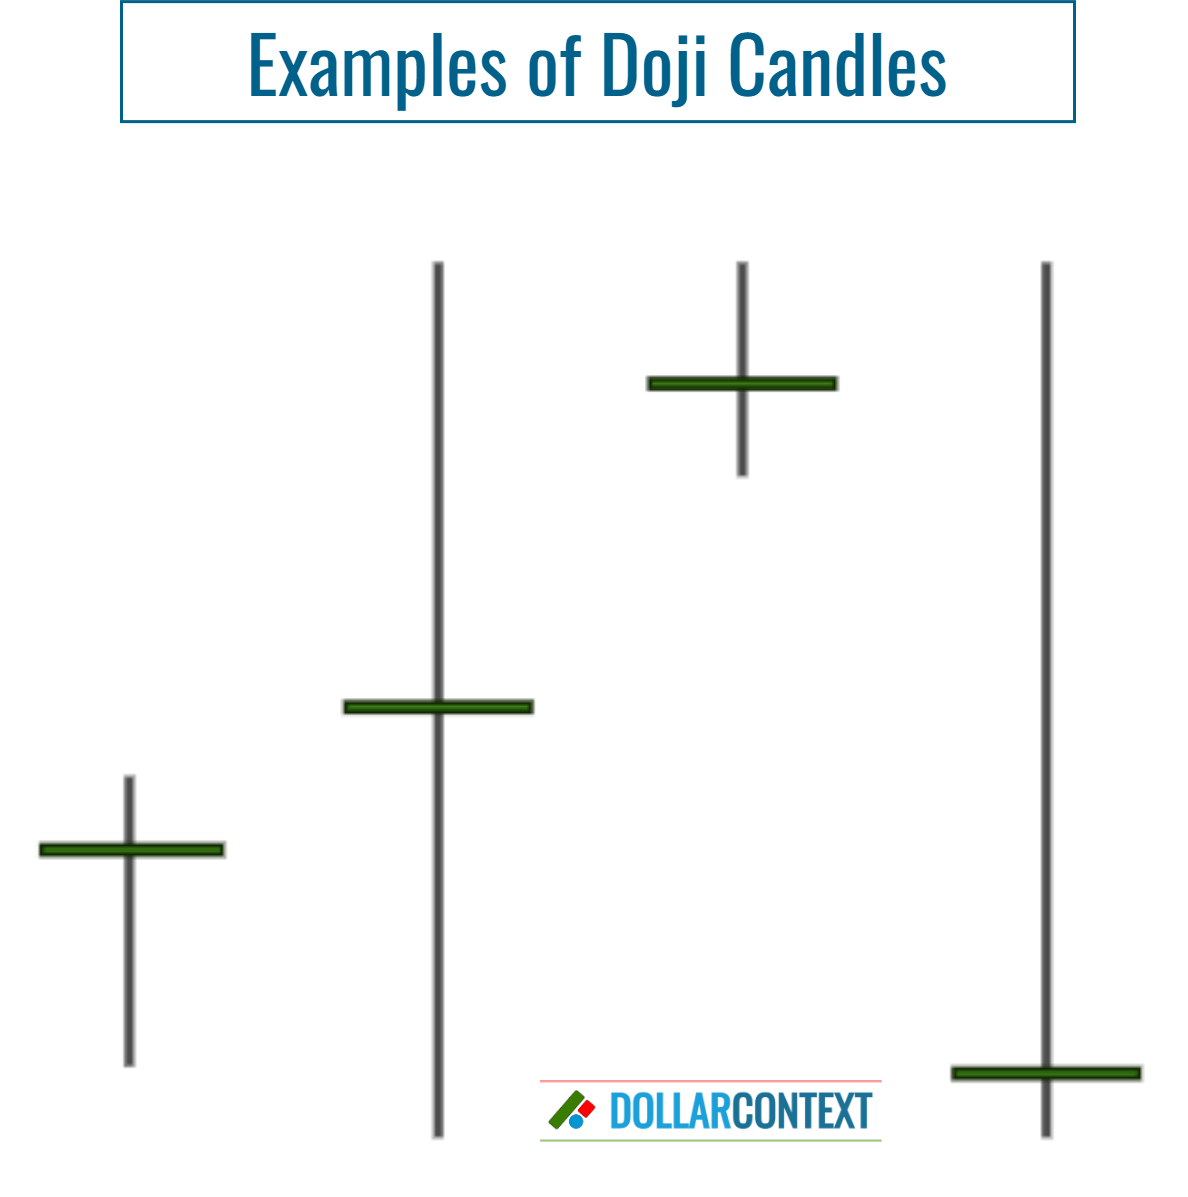 Ideal Shapes of Doji Candles